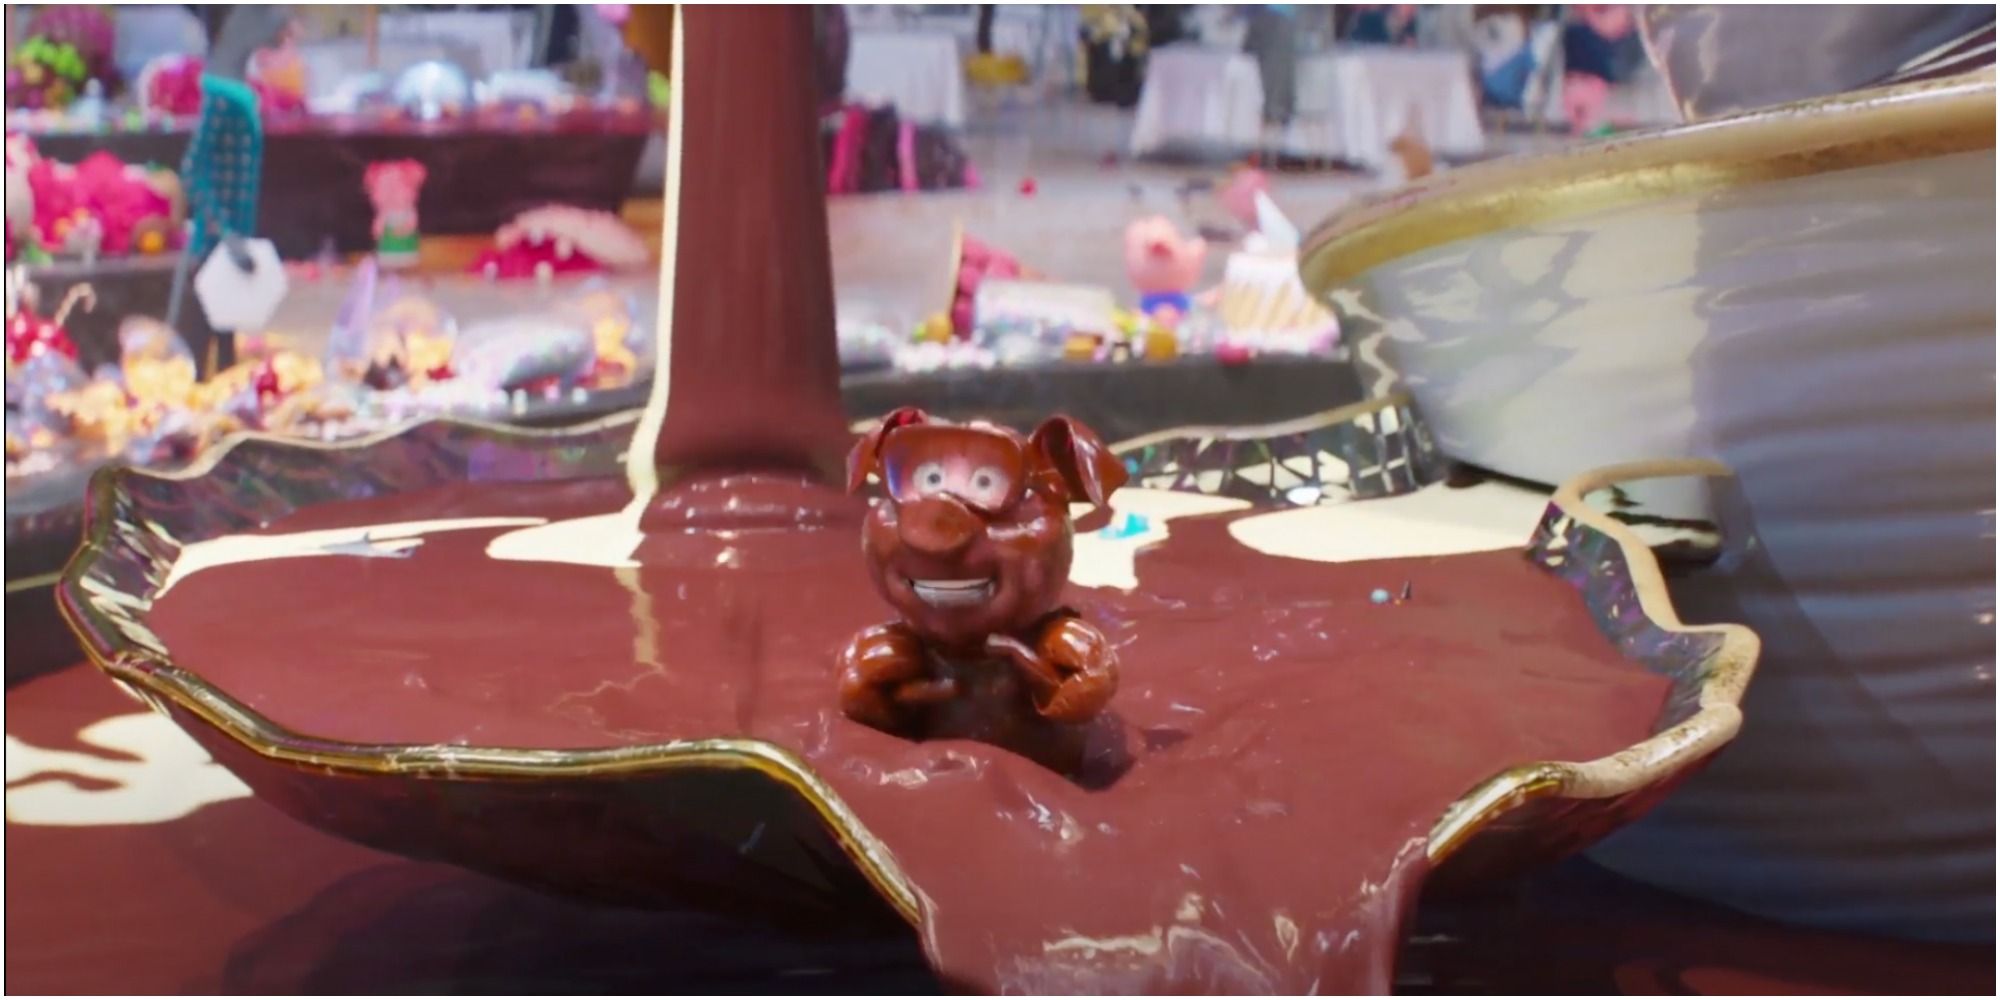 Pig plays in chocolate in Sing 2